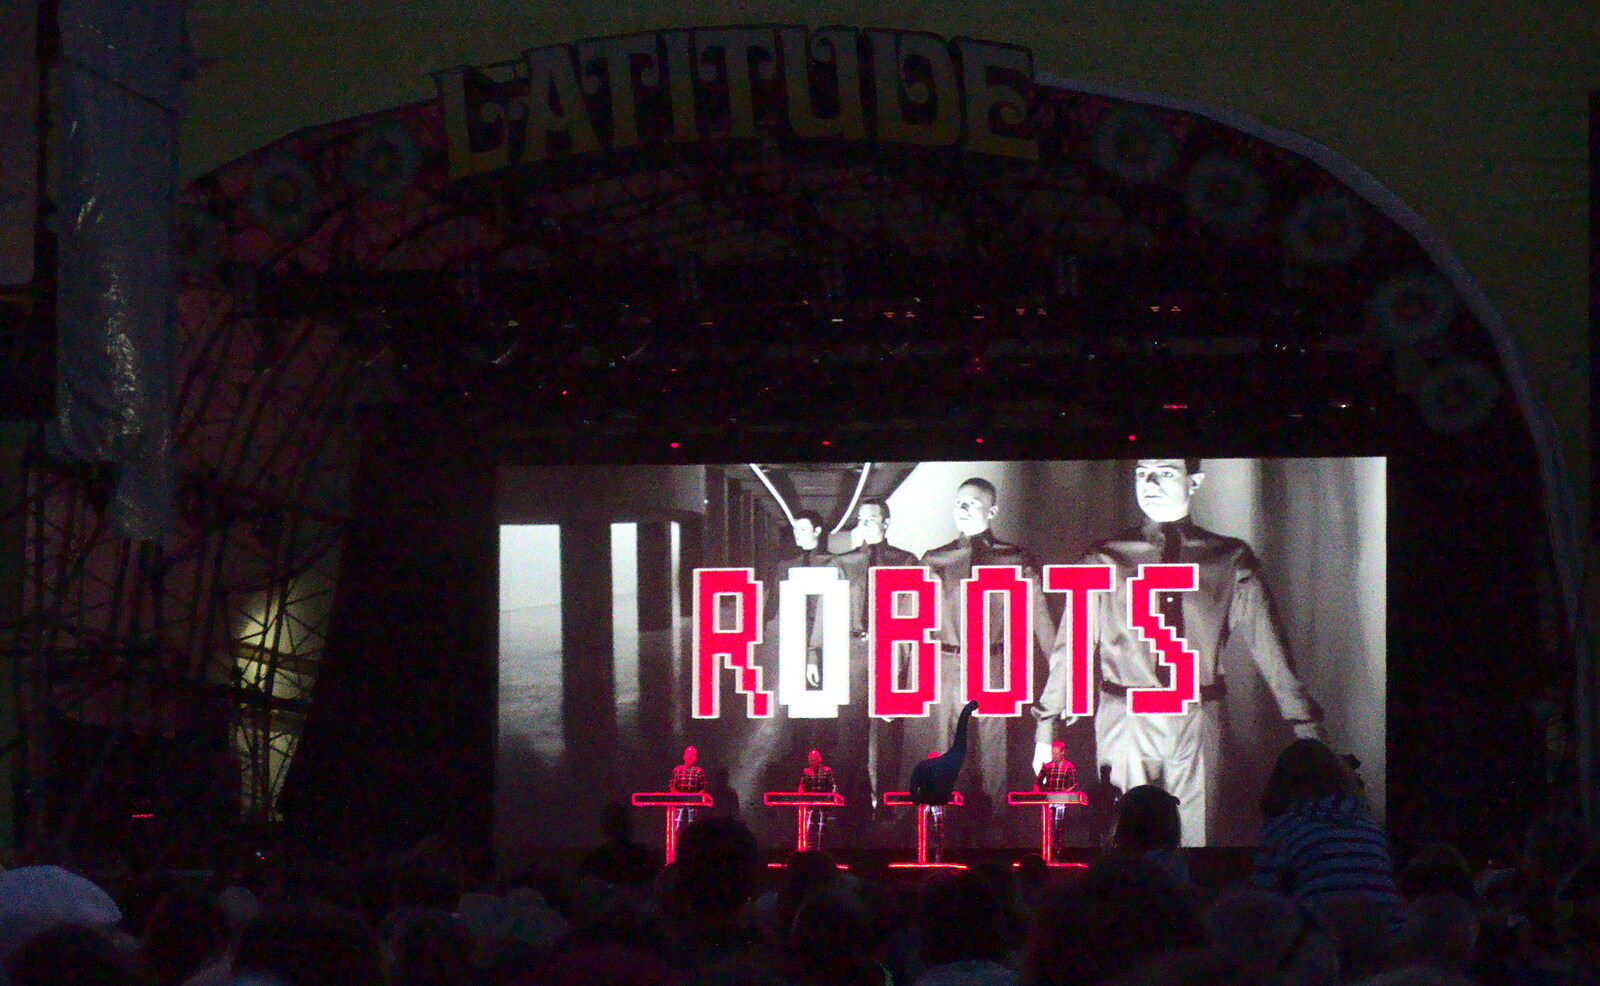 German electro-pioneers Kraftwerk are on stage from The 8th Latitude Festival, Henham Park, Southwold, Suffolk - 18th July 2013